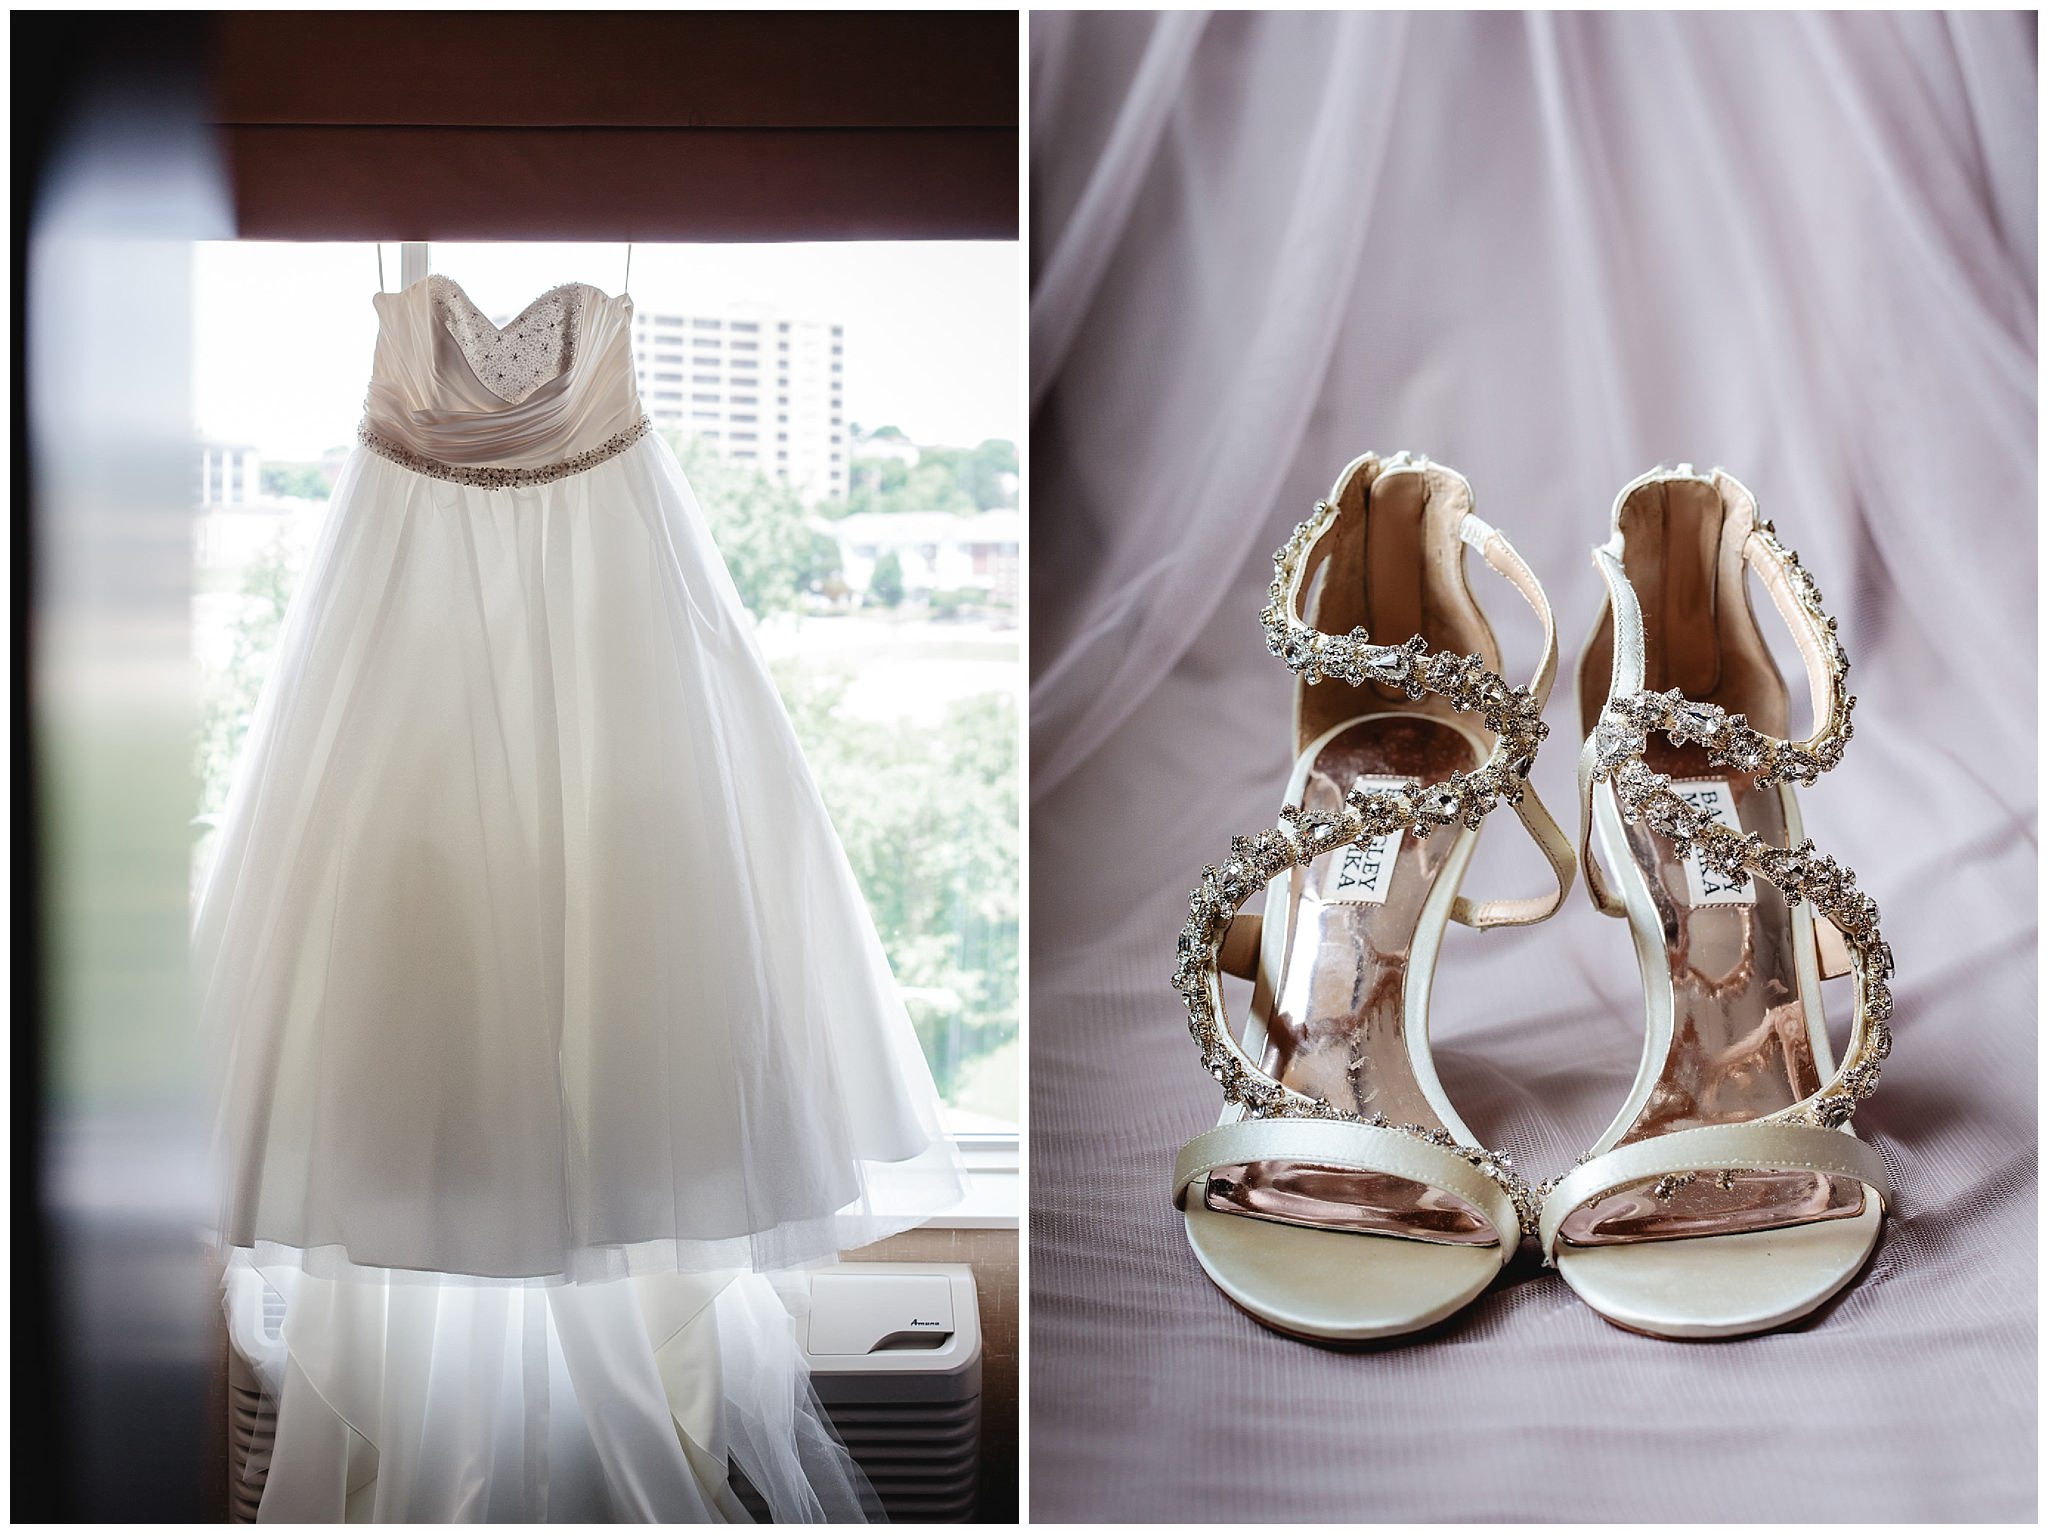 Bride's Alfred Angelo wedding dress and her Badgely Mischka wedding shoes